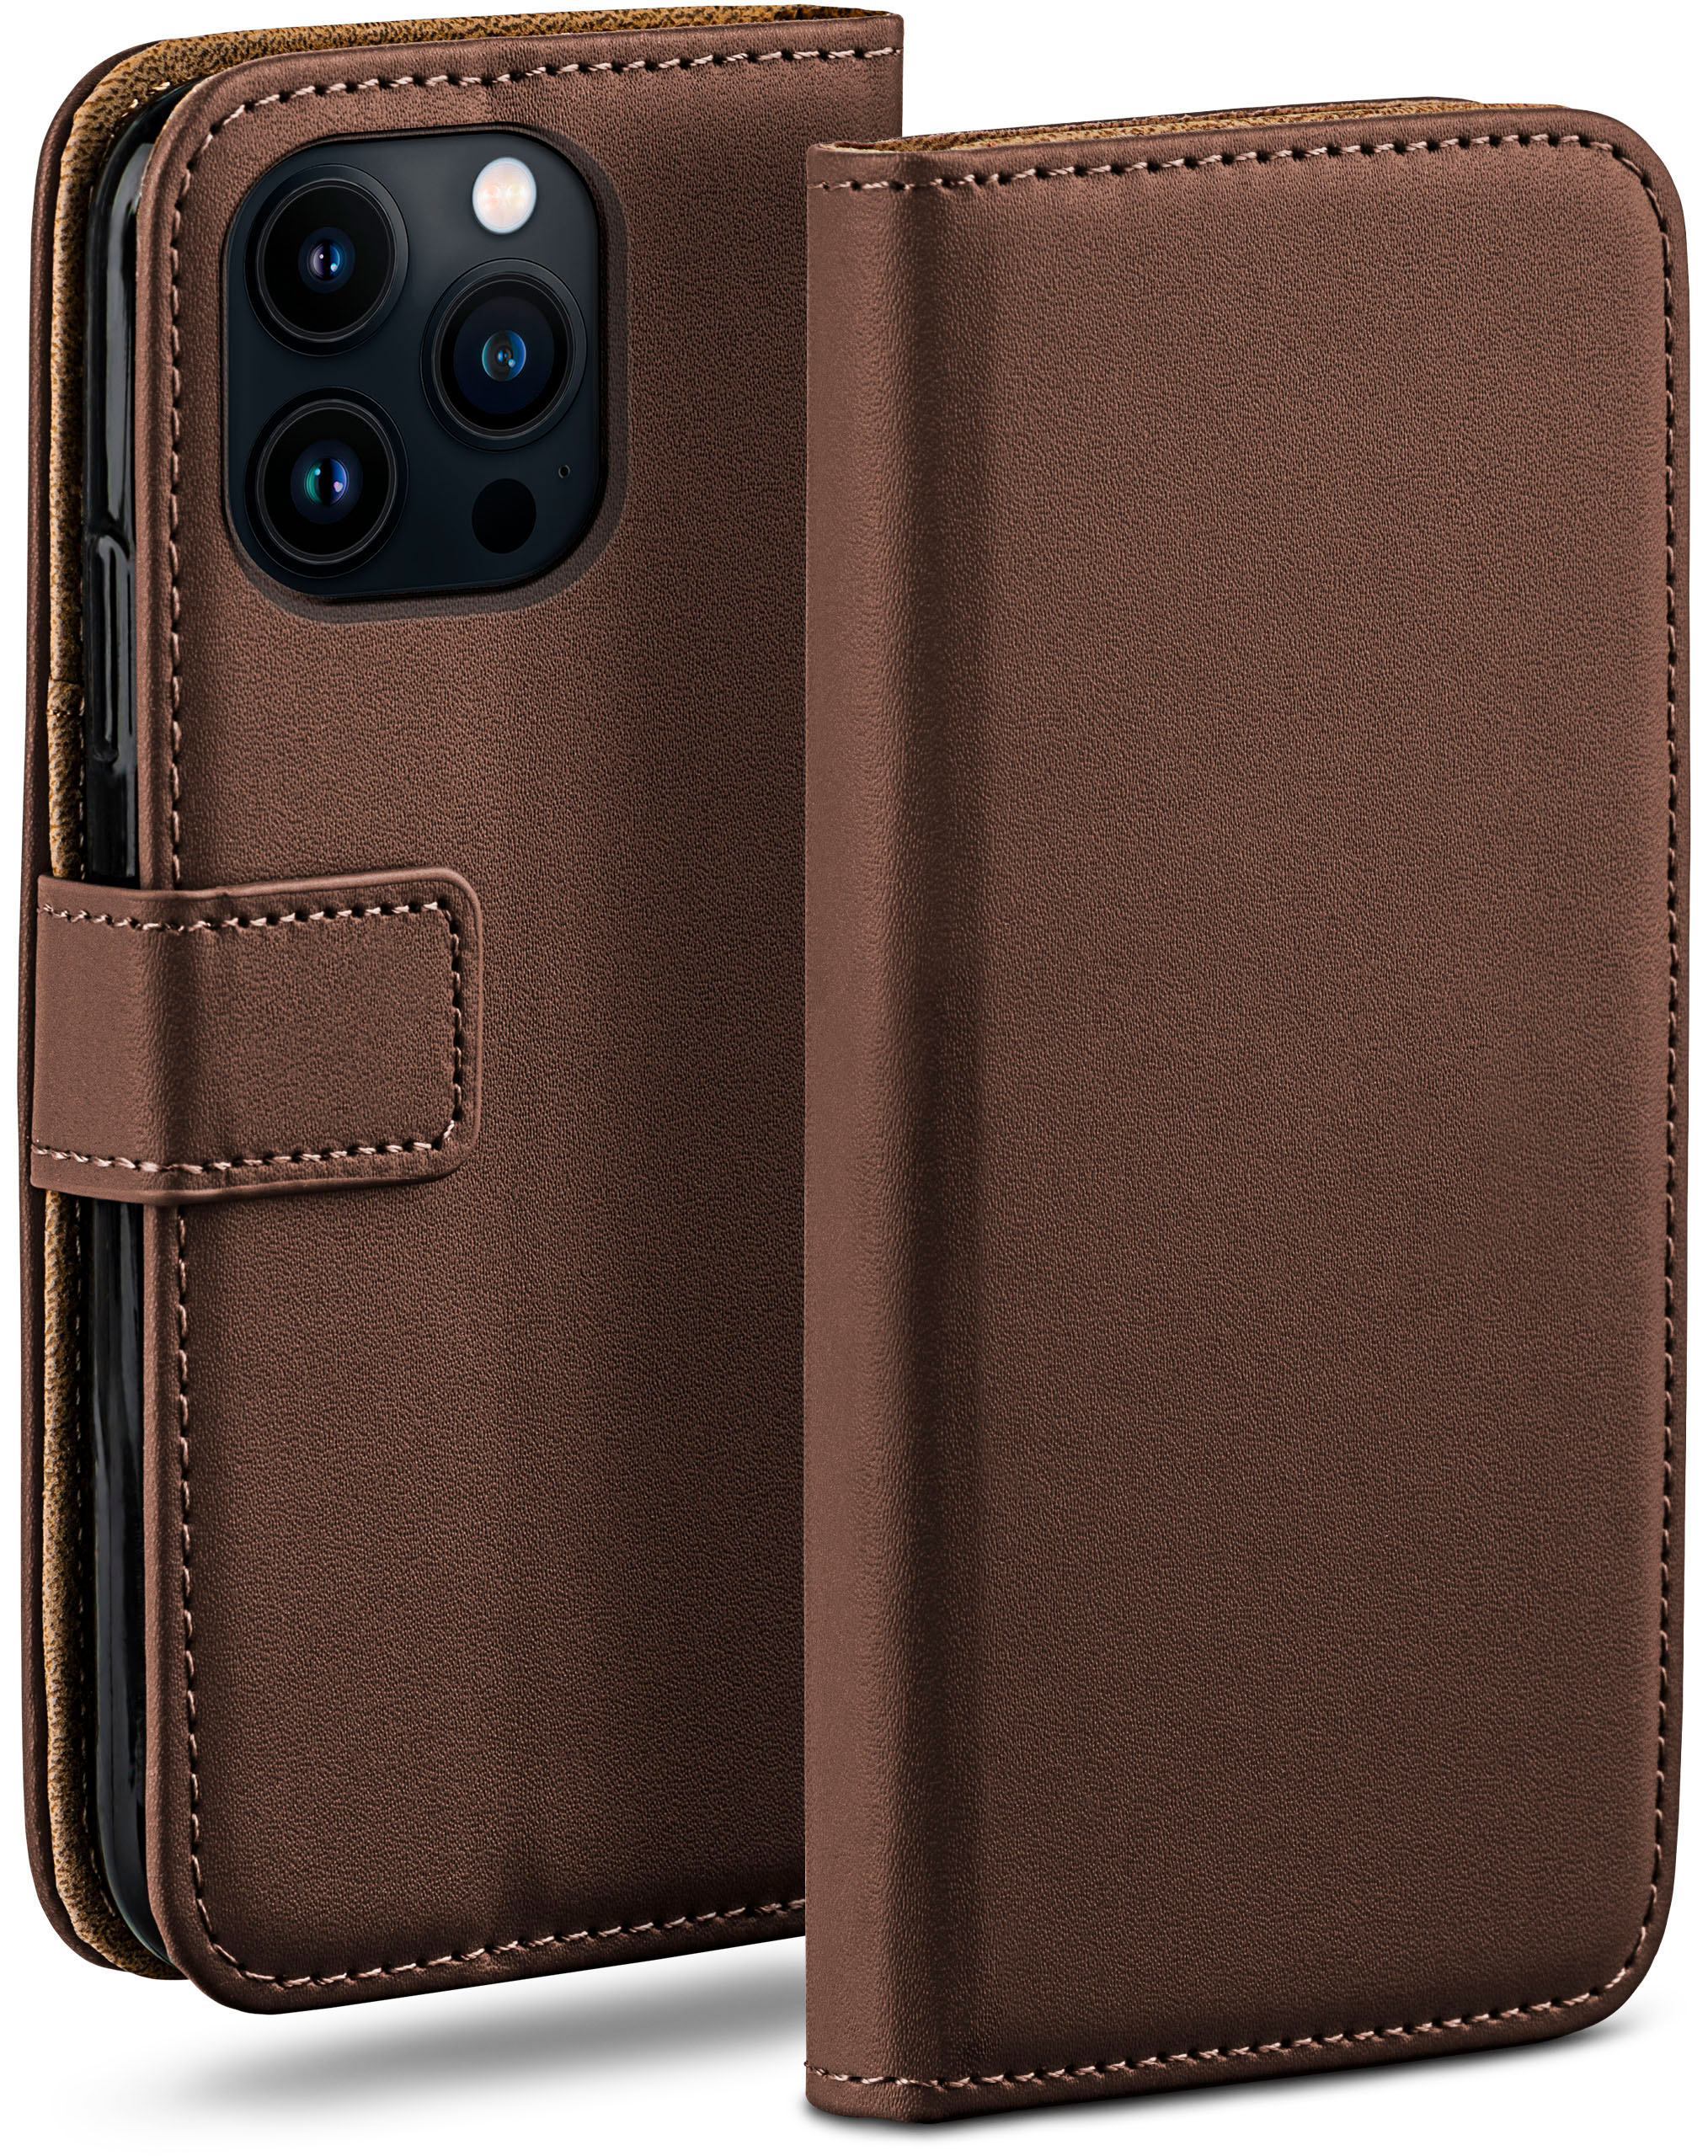 MOEX Book Bookcover, Max, 13 Pro Apple, Oxide-Brown Case, iPhone